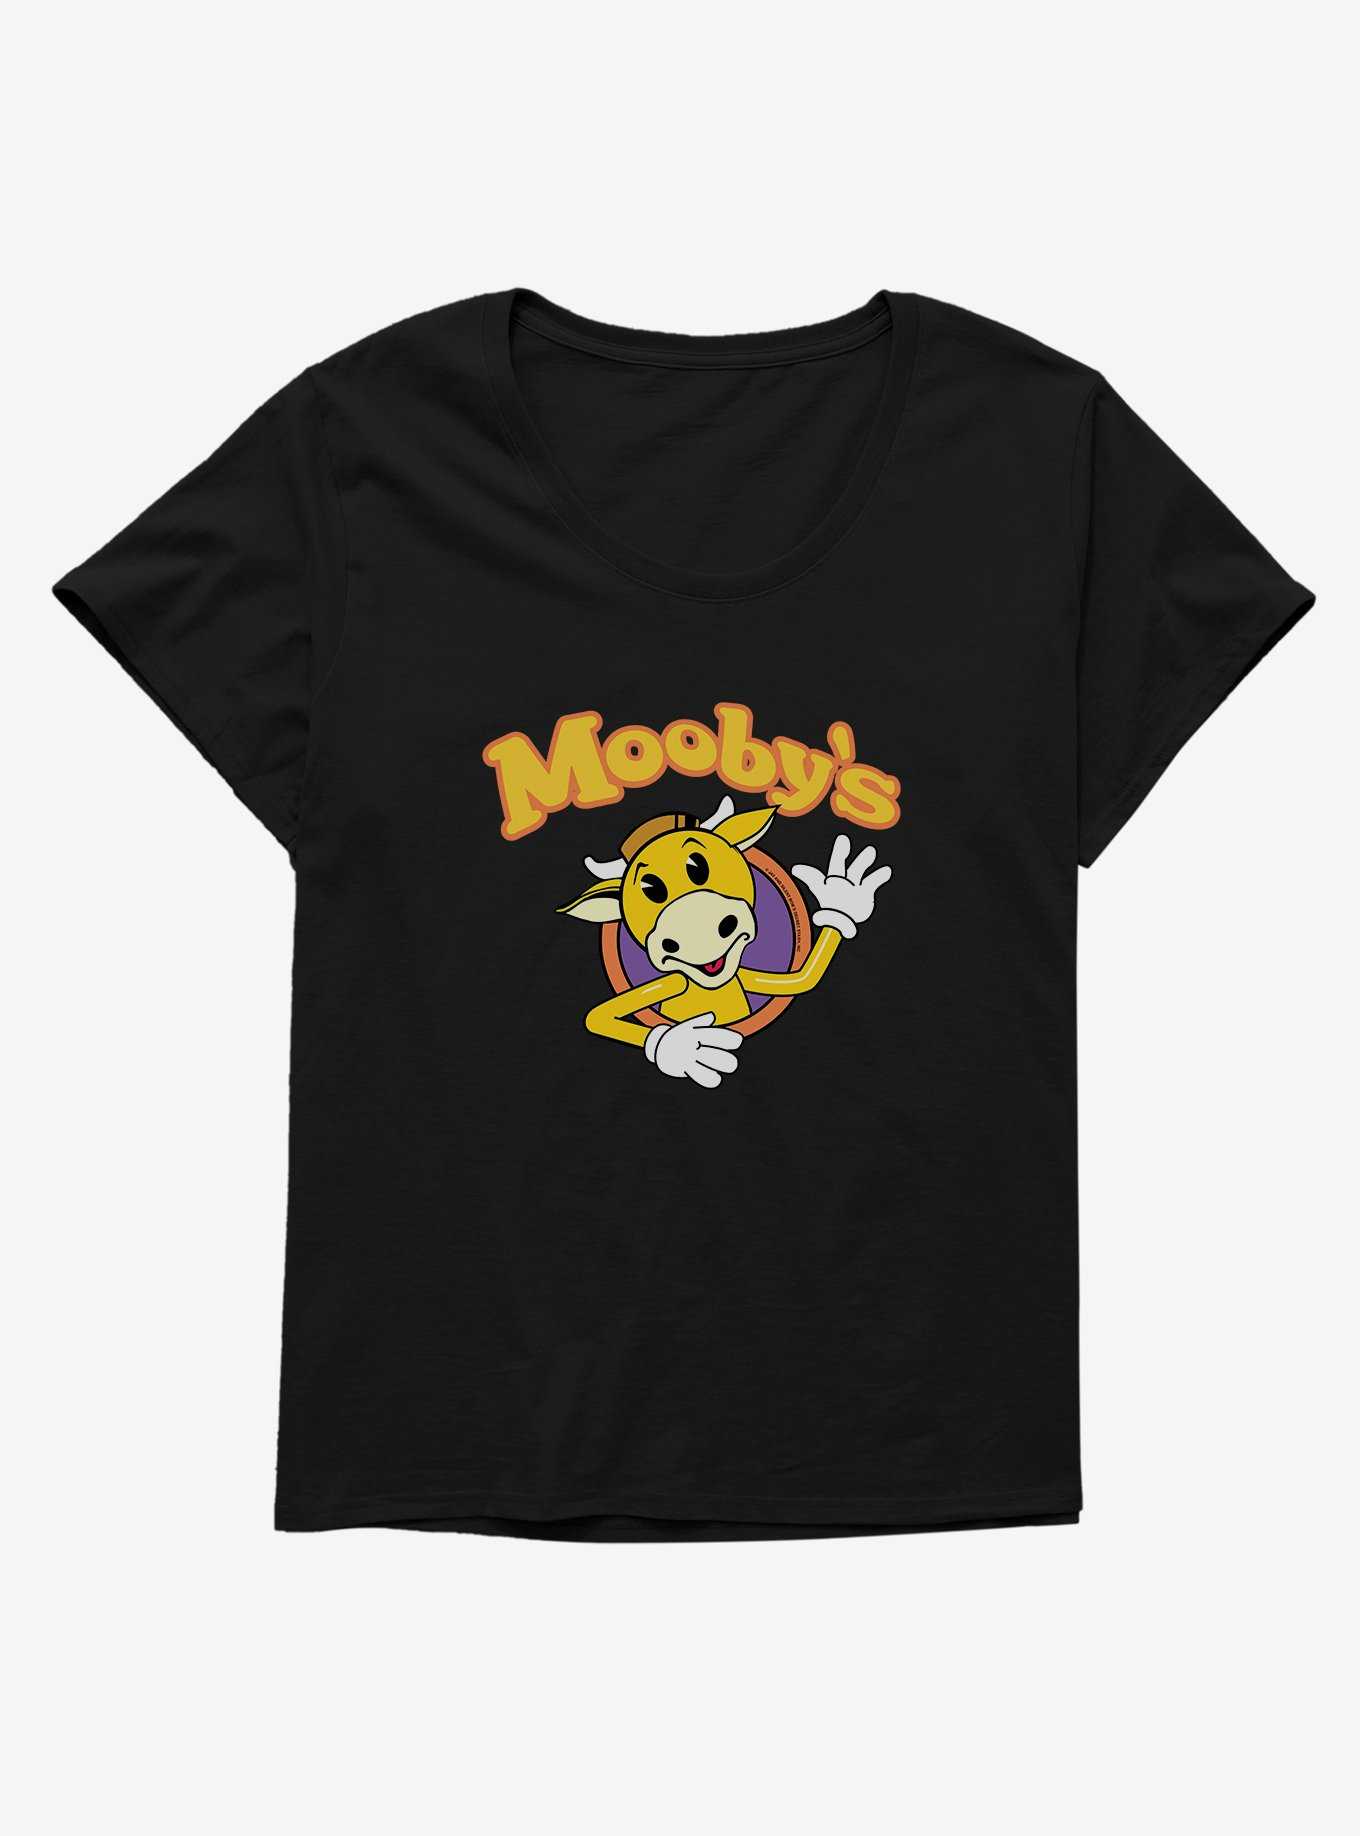 Clerks 3 Mooby's Logo Womens T-Shirt Plus Size, , hi-res